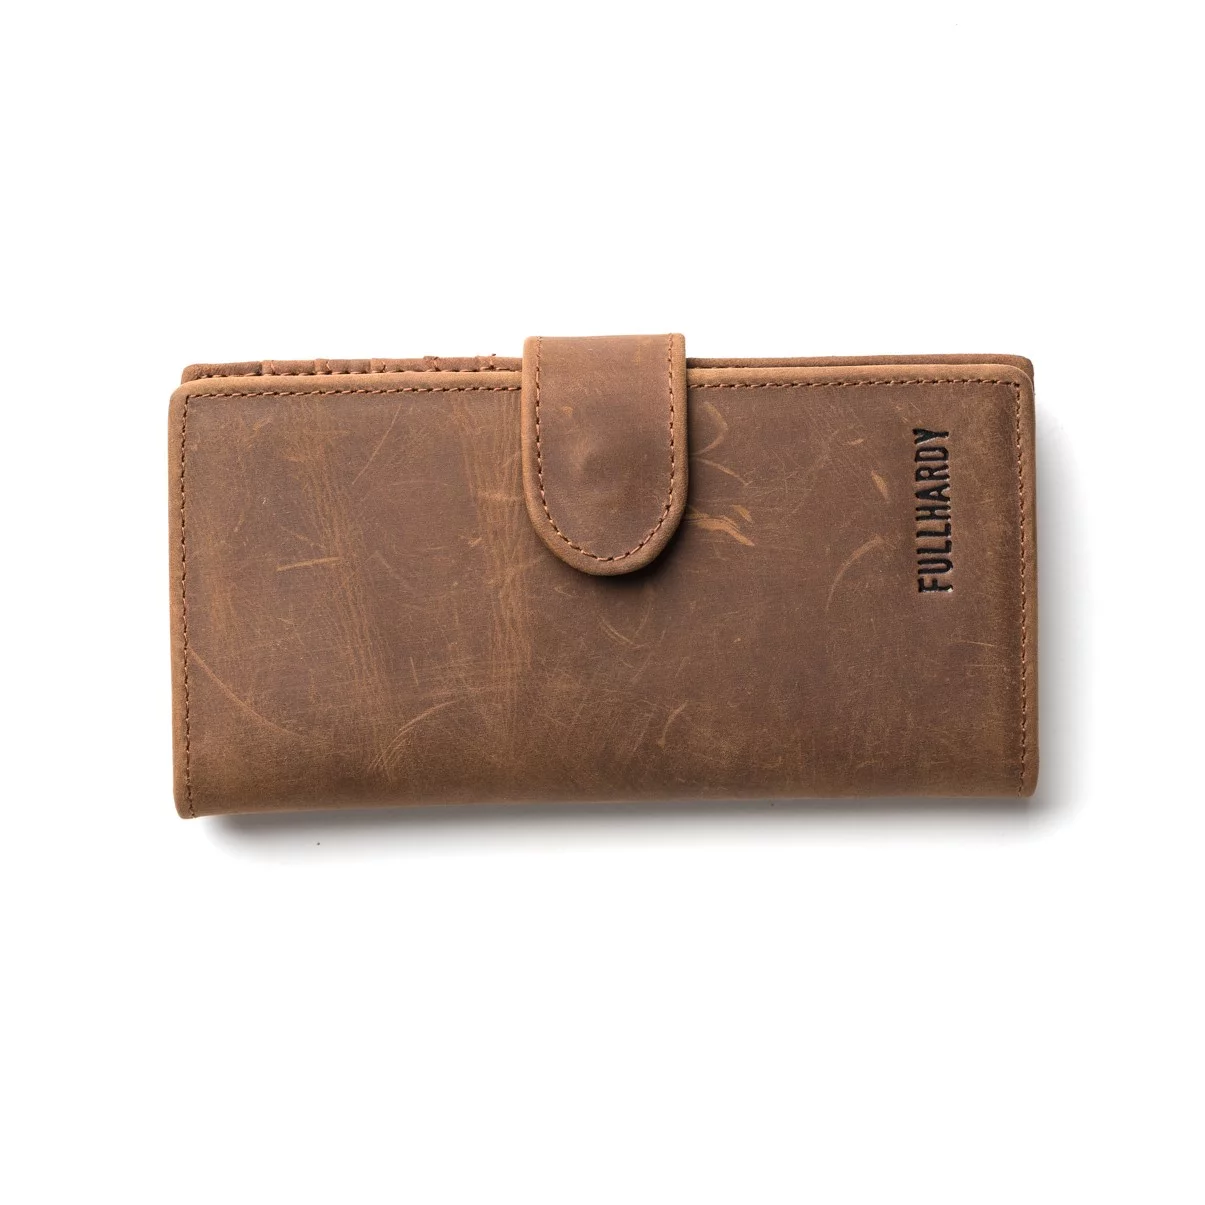 Portefeuille Fullhardy Brown D8031 (Brown)